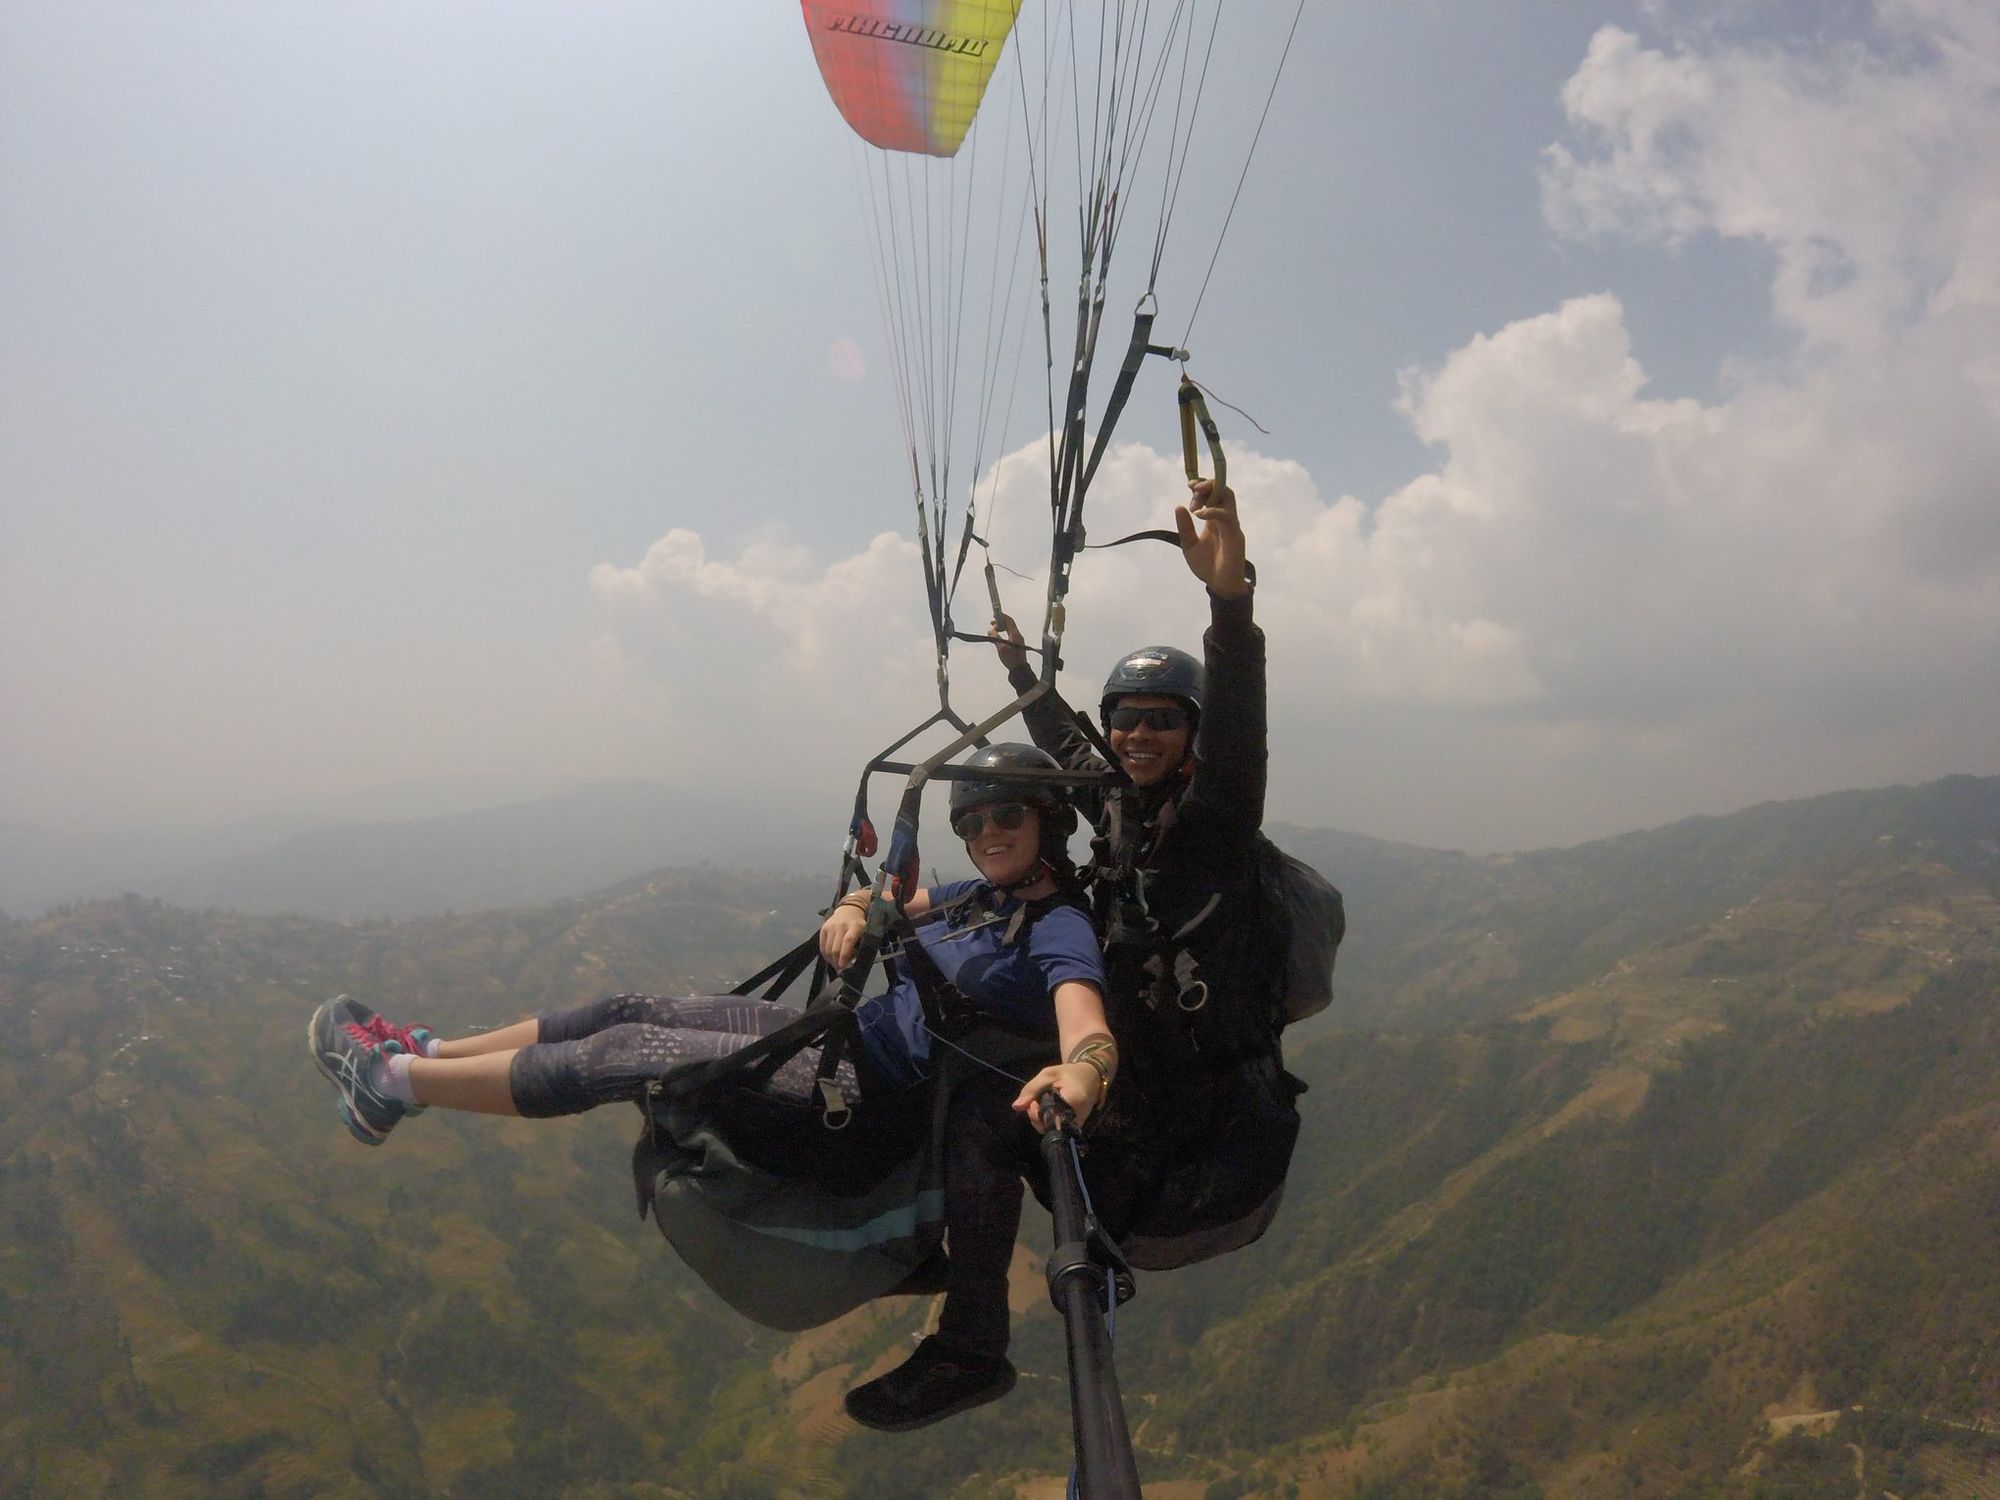 Paragliding over Kathmandu Attracts Tourists